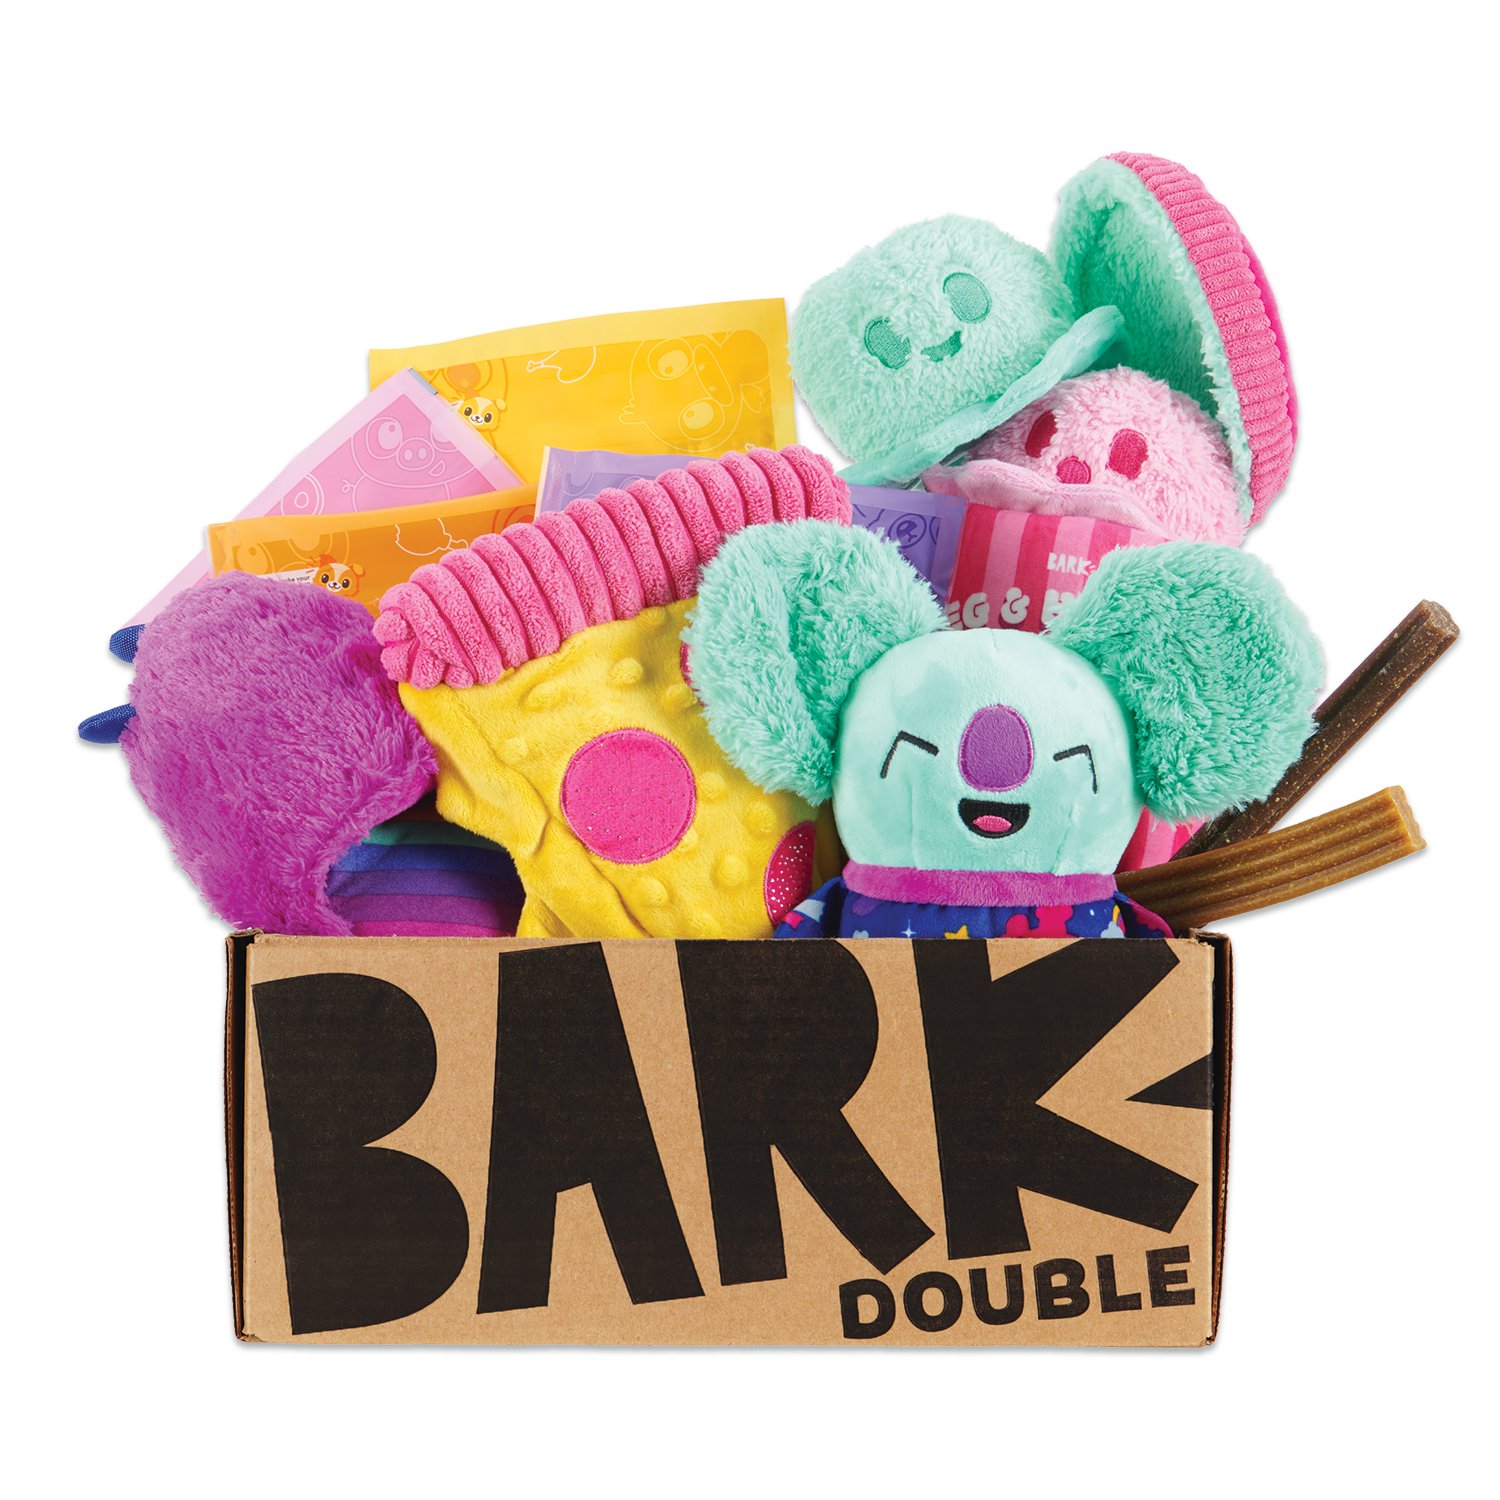 Barkbox Tennis Ball Club Deal: Get New Toys For Your Pup For Just $5!